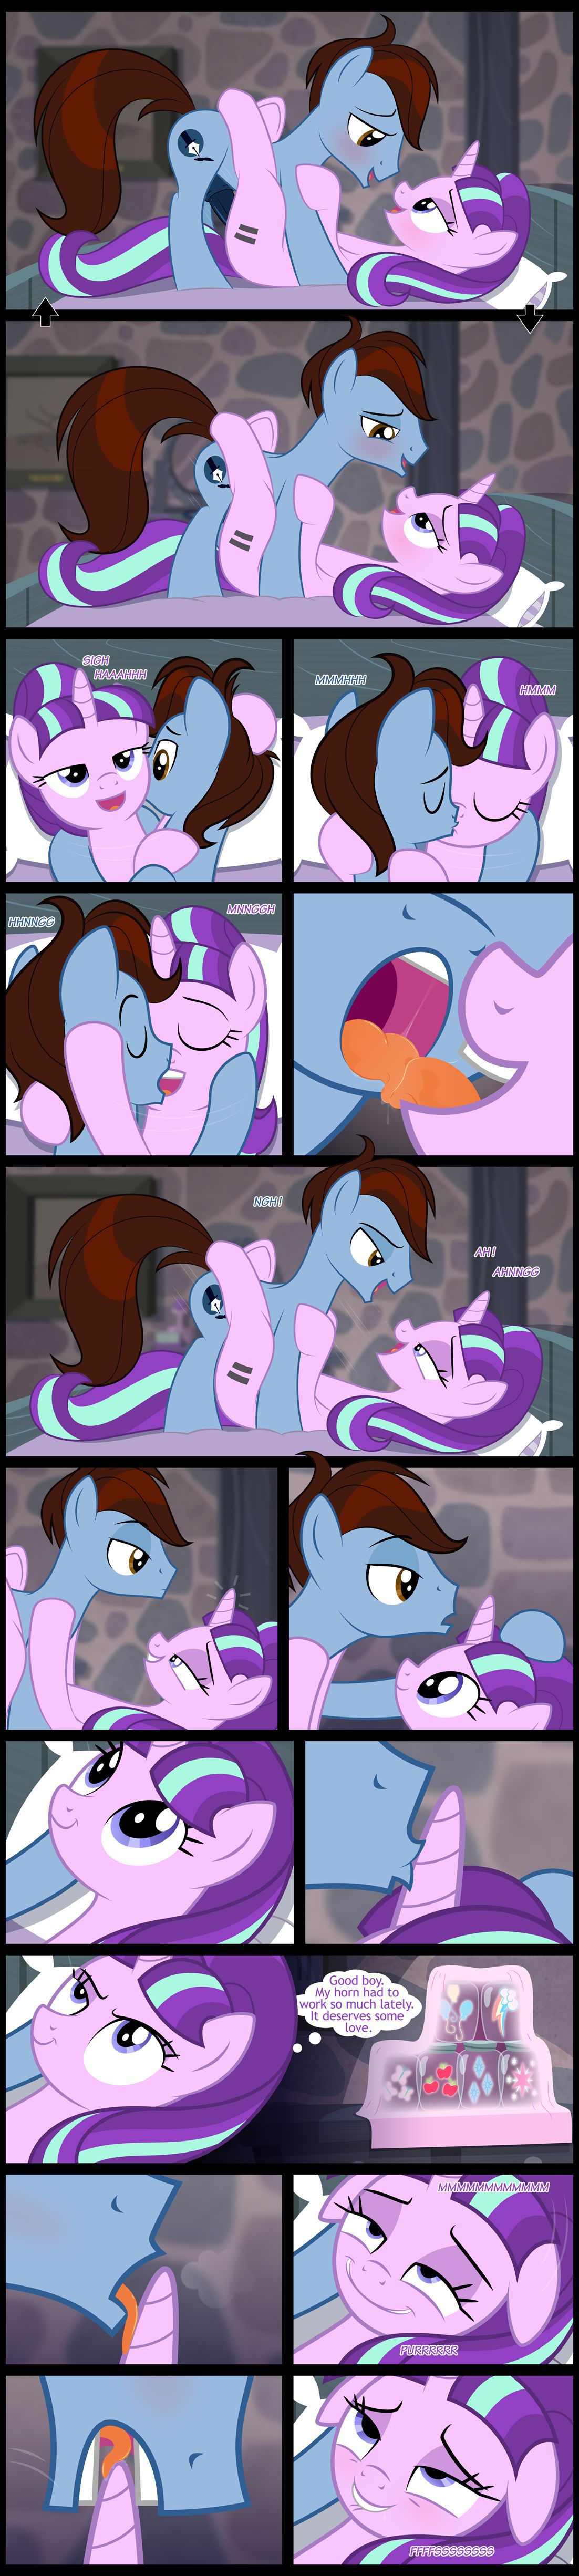 [Culu-Bluebeaver] The Newcomer (My Little Pony: Friendship is Magic) 6